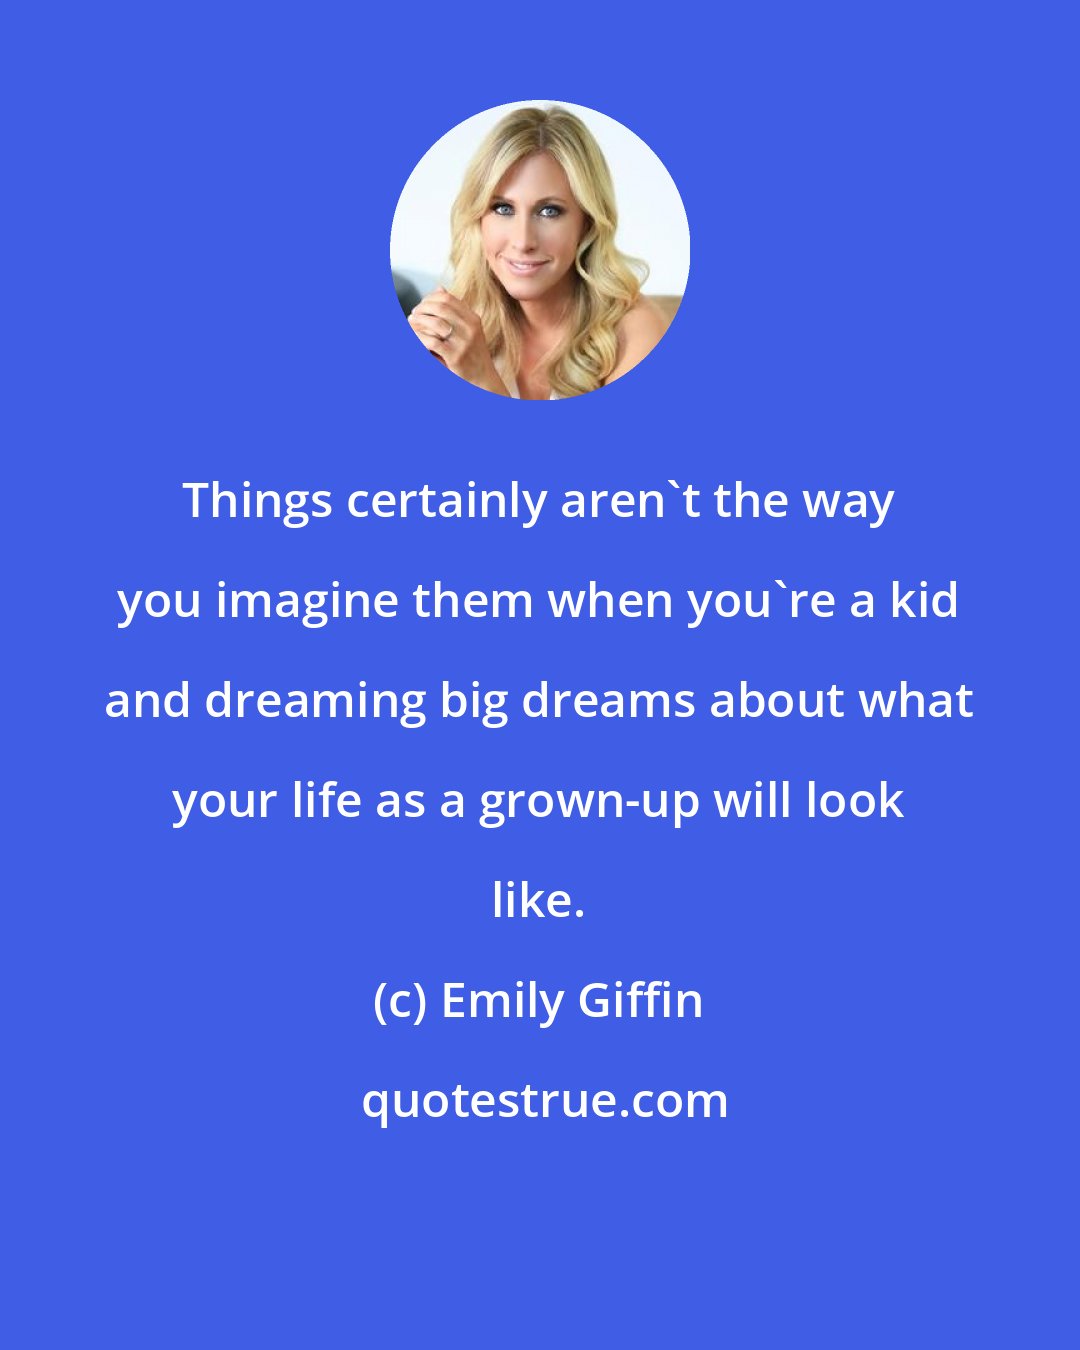 Emily Giffin: Things certainly aren't the way you imagine them when you're a kid and dreaming big dreams about what your life as a grown-up will look like.